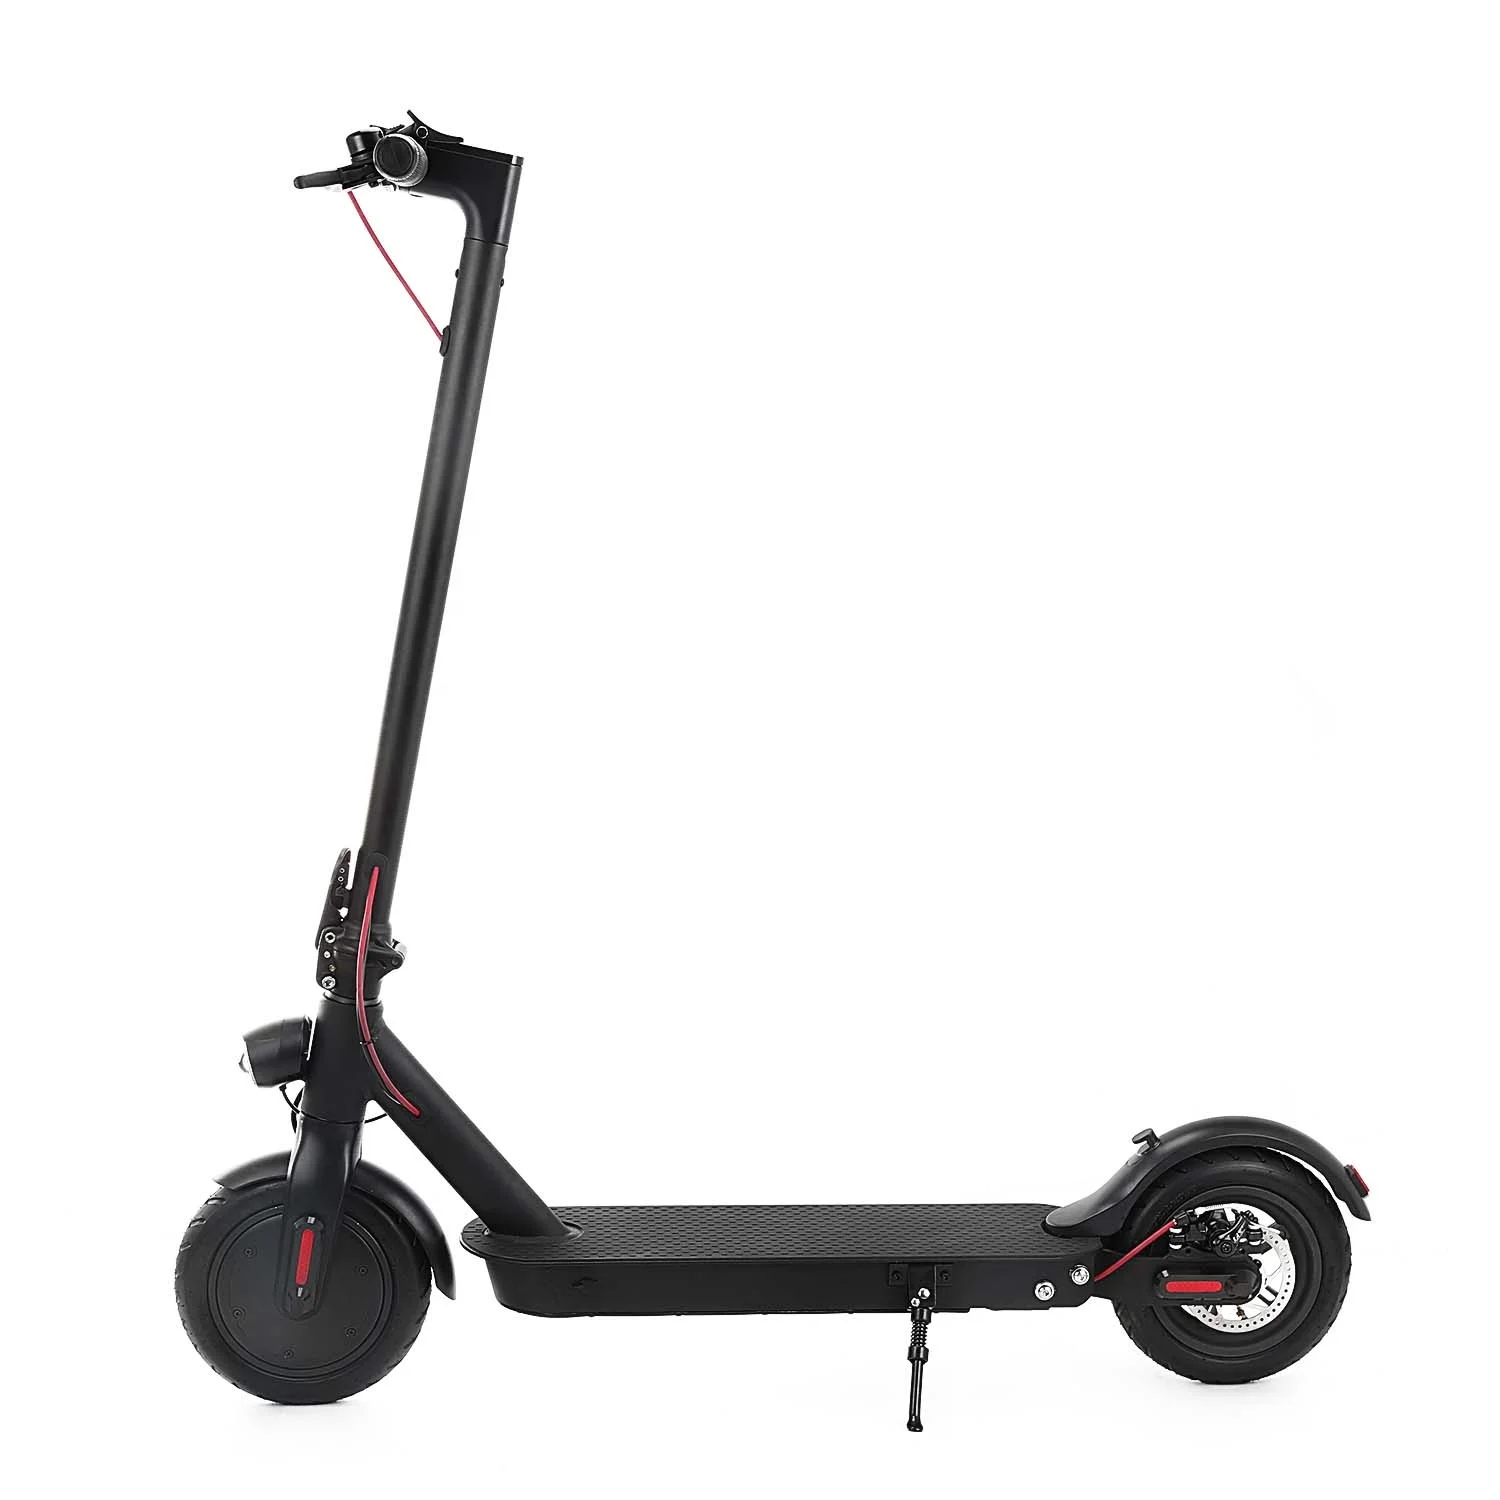 

iScooter E9D i9pro EU 350W Motor 8.5inch 30kmh Fast Selfbalancing Foldable Adult Electric E Scooter for Adults, Black